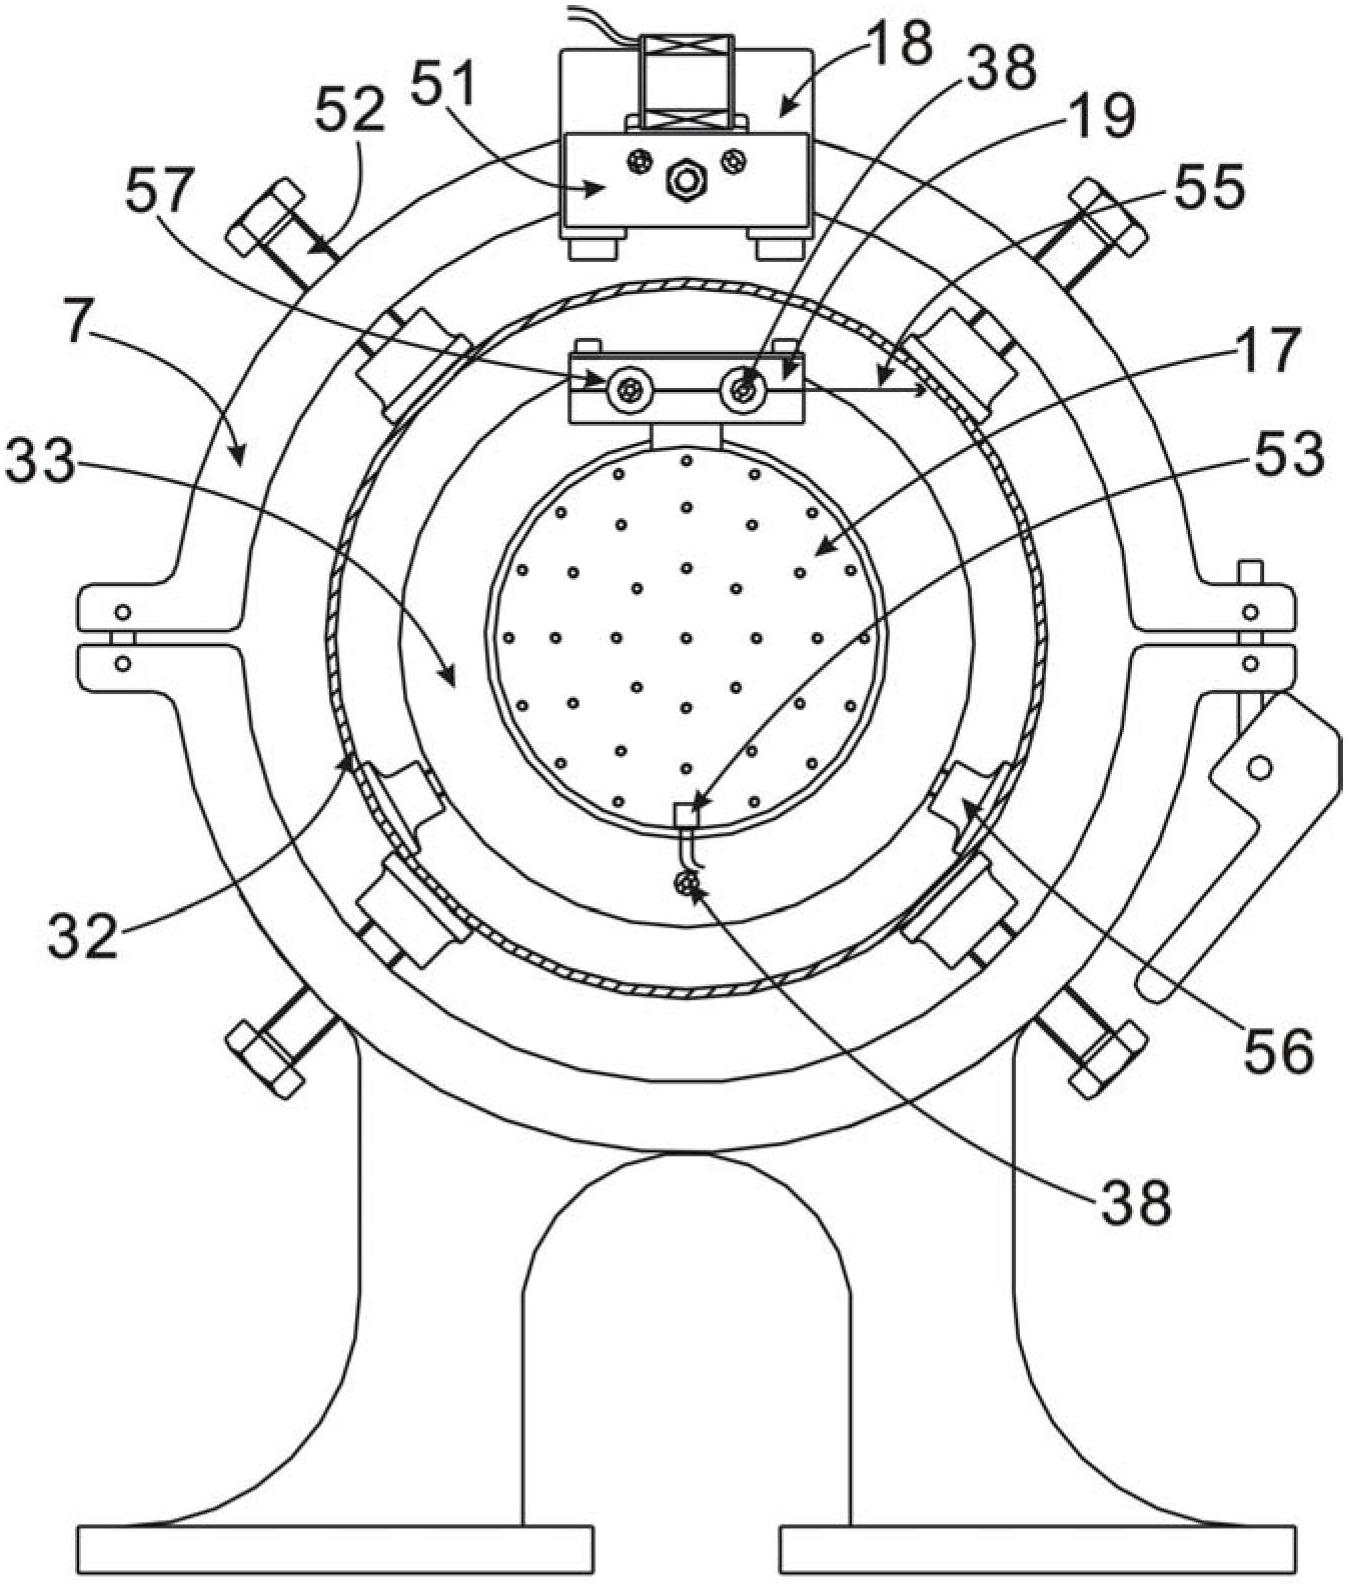 Coating device for researching vacuum spraying characteristics